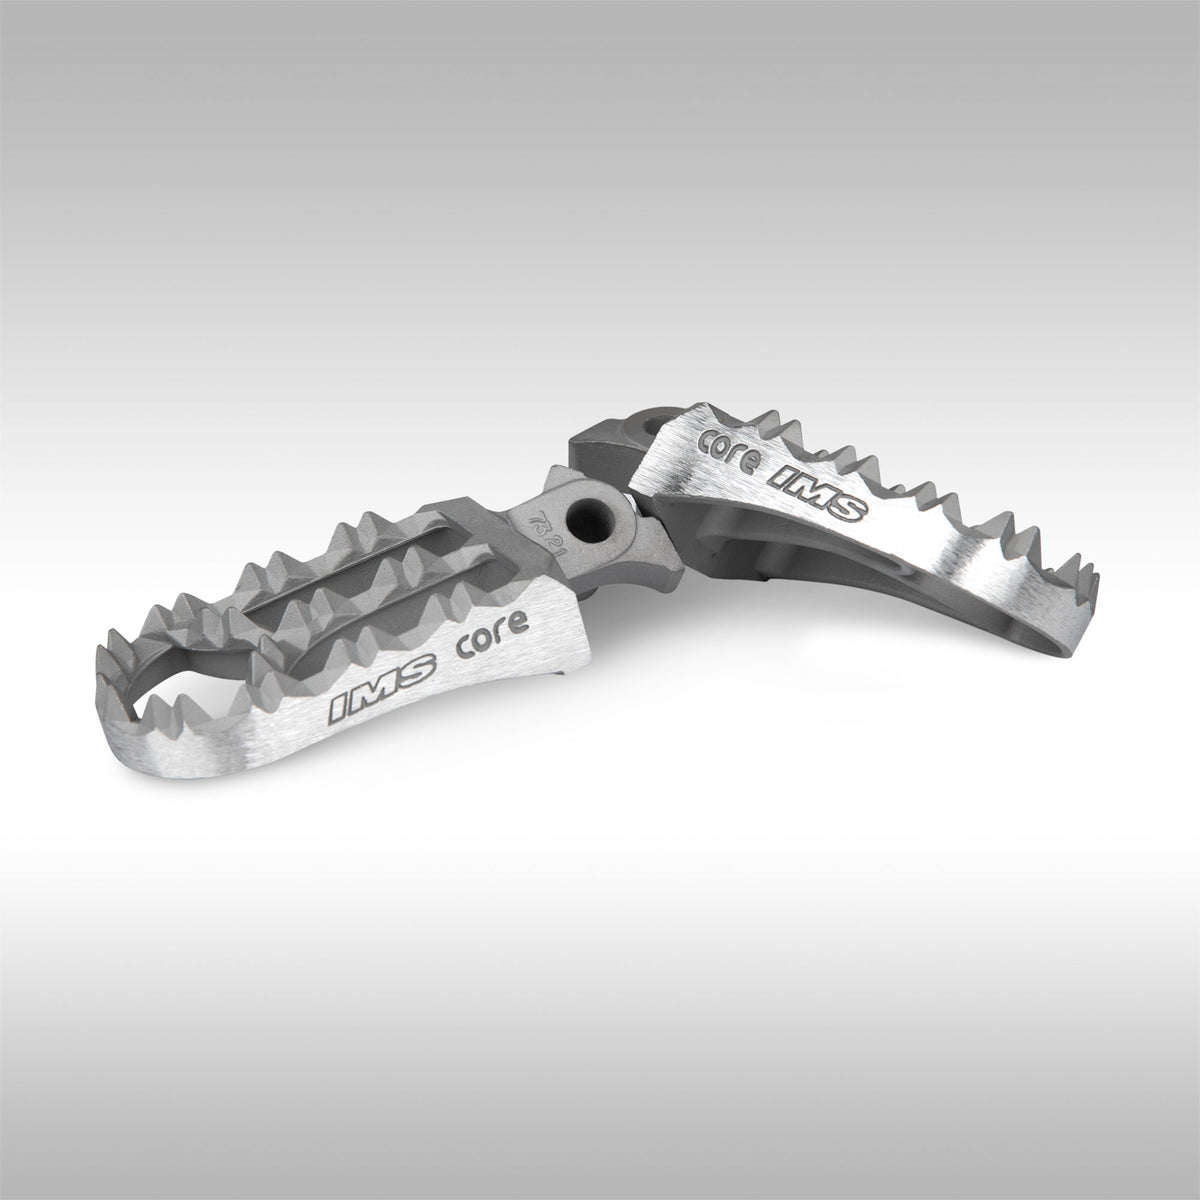 IMS PRODUCTS - CORE ENDURO FOOT PEGS - KLR650 / SUPER TENERE / V-STROM